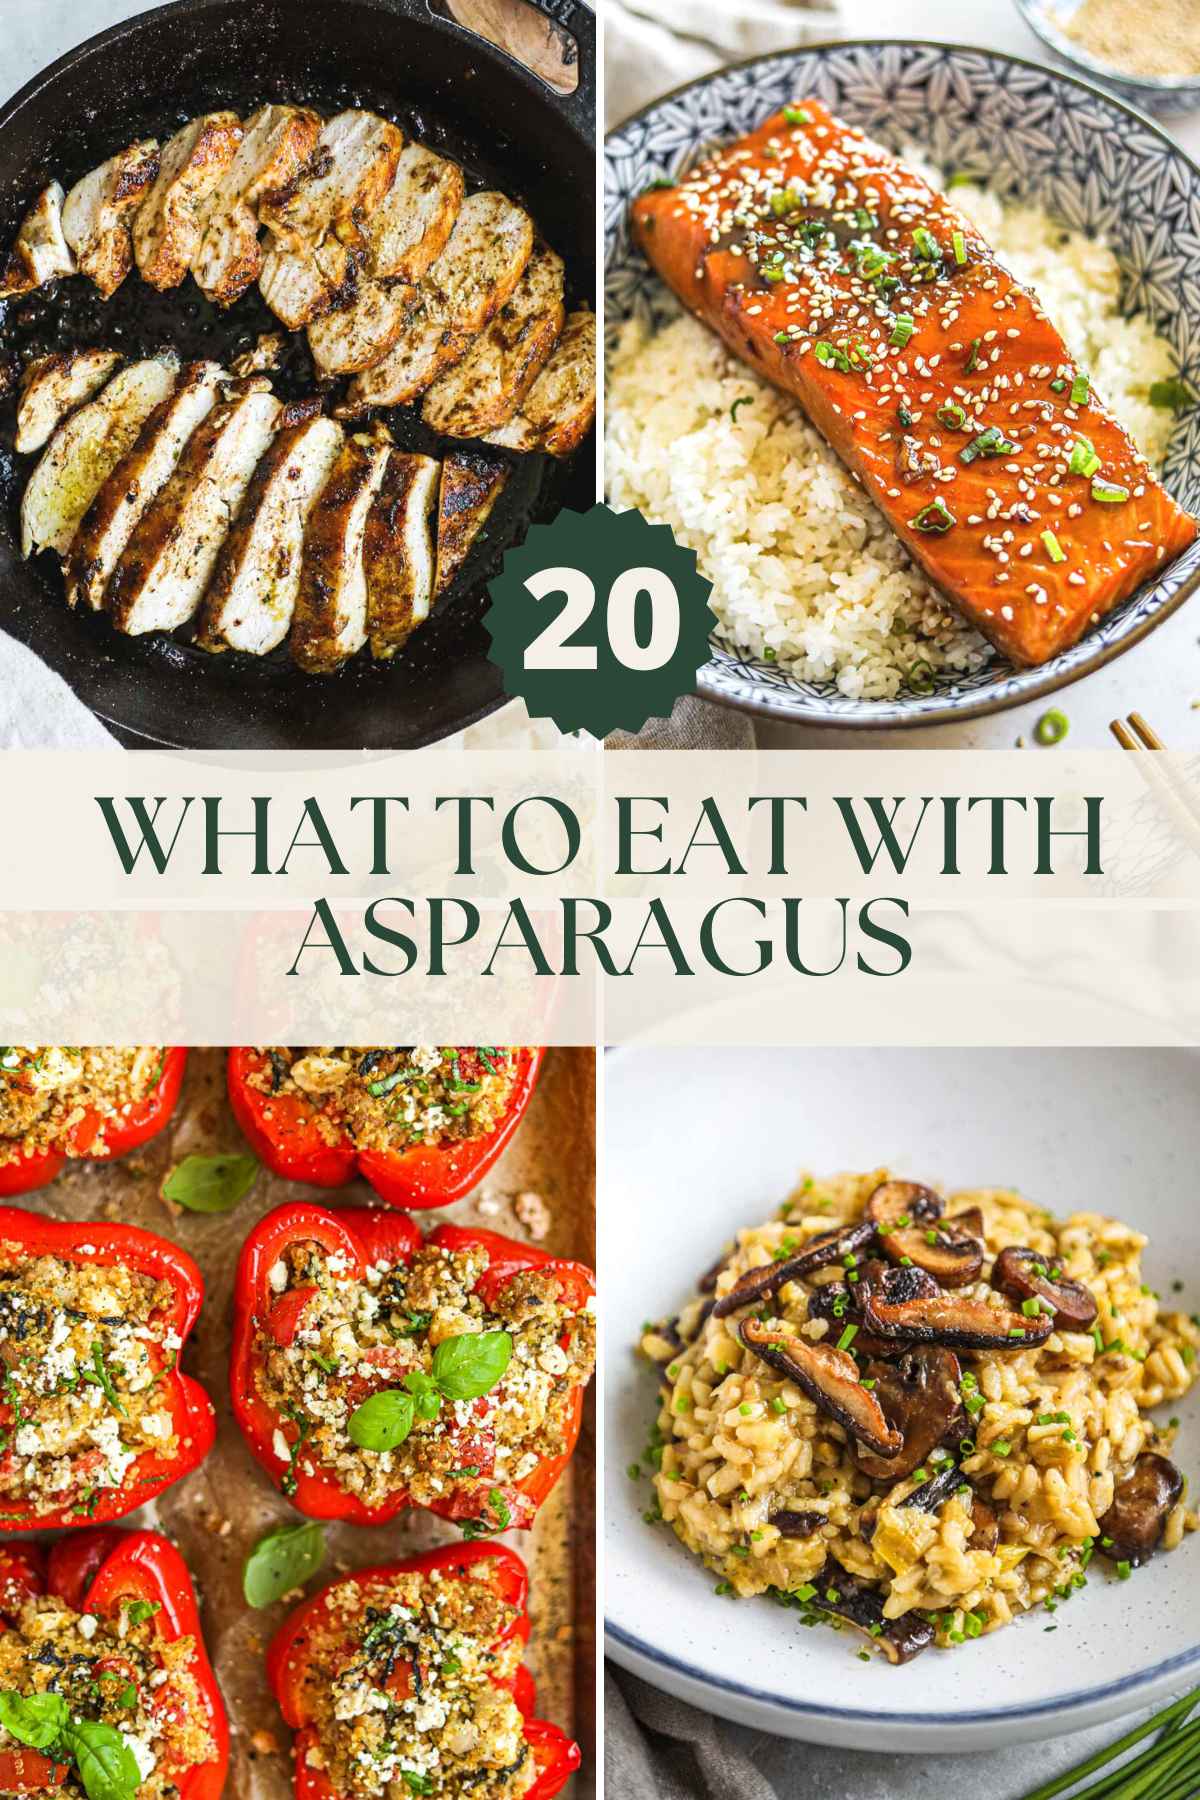 What to eat with asparagus, including cast iron chicken breast, salmon, quinoa stuffed bell peppers, truffle mushroom risotto, and more.